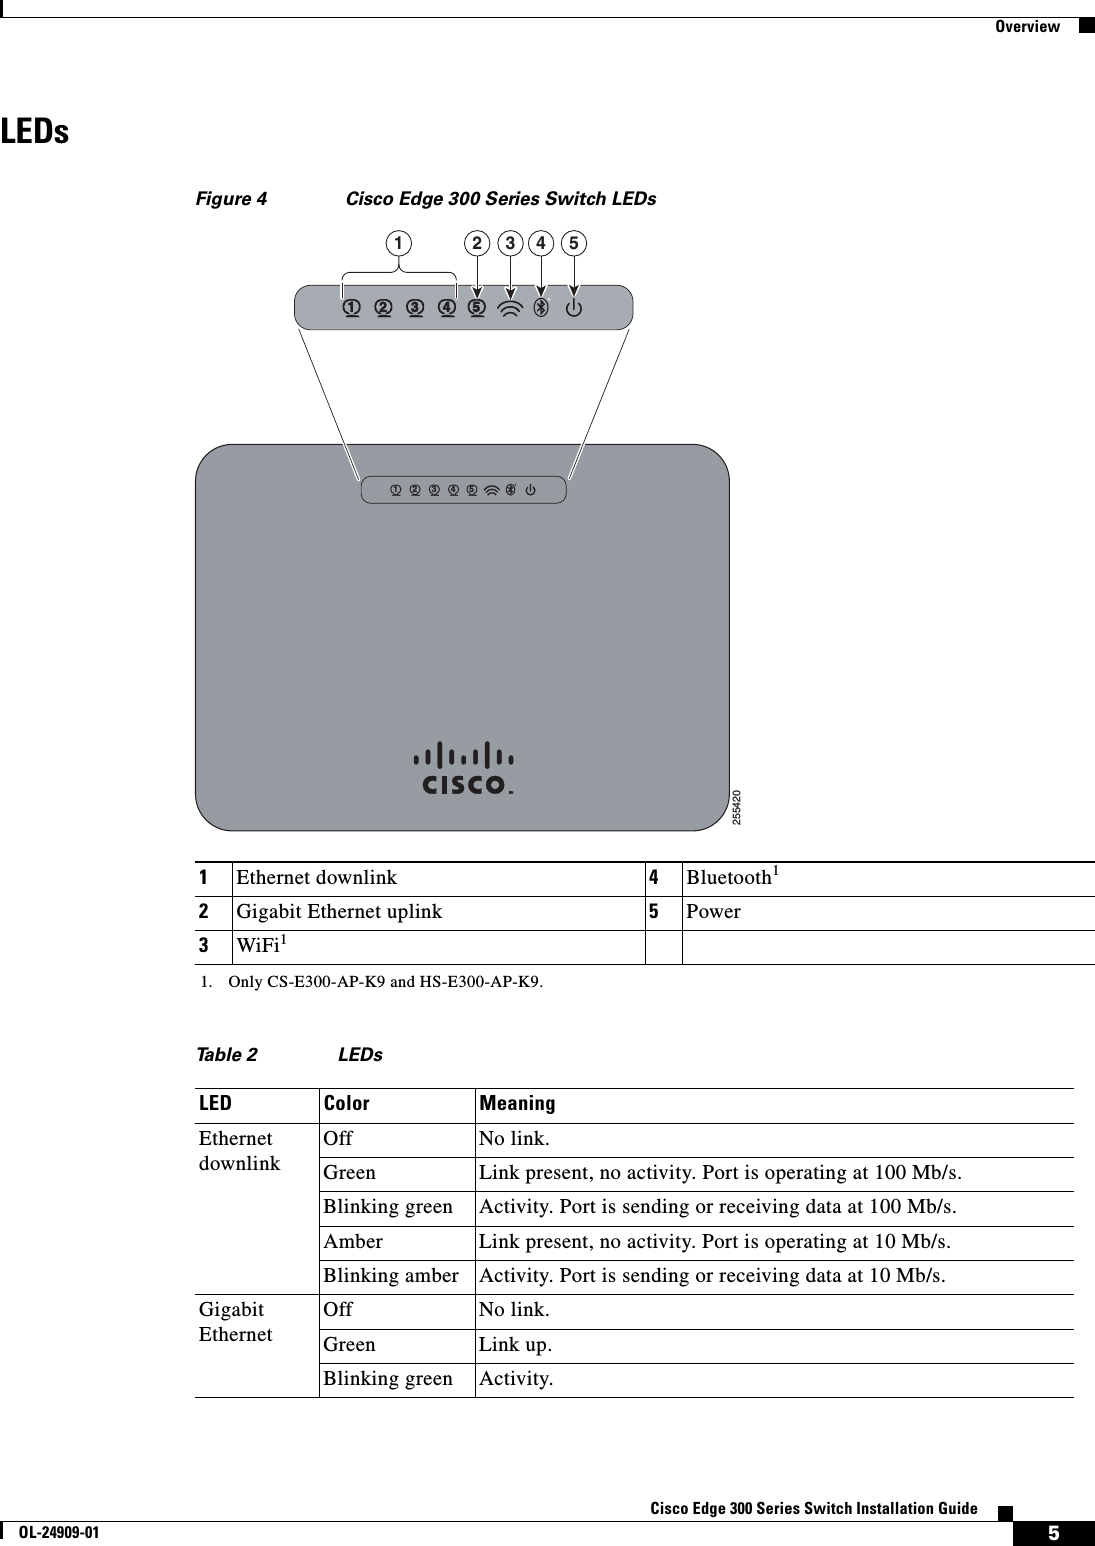  5Cisco Edge 300 Series Switch Installation GuideOL-24909-01OverviewLEDsFigure 4 Cisco Edge 300 Series Switch LEDs1Ethernet downlink 4Bluetooth12Gigabit Ethernet uplink 5Power 3WiFi11. Only CS-E300-AP-K9 and HS-E300-AP-K9.Ta b l e 2 L E D sLED Color MeaningEthernet downlinkOff No link.Green Link present, no activity. Port is operating at 100 Mb/s. Blinking green Activity. Port is sending or receiving data at 100 Mb/s.Amber Link present, no activity. Port is operating at 10 Mb/s.Blinking amber Activity. Port is sending or receiving data at 10 Mb/s.Gigabit EthernetOff No link.Green Link up.Blinking green Activity.255420R1234R12 3 455213 4 5